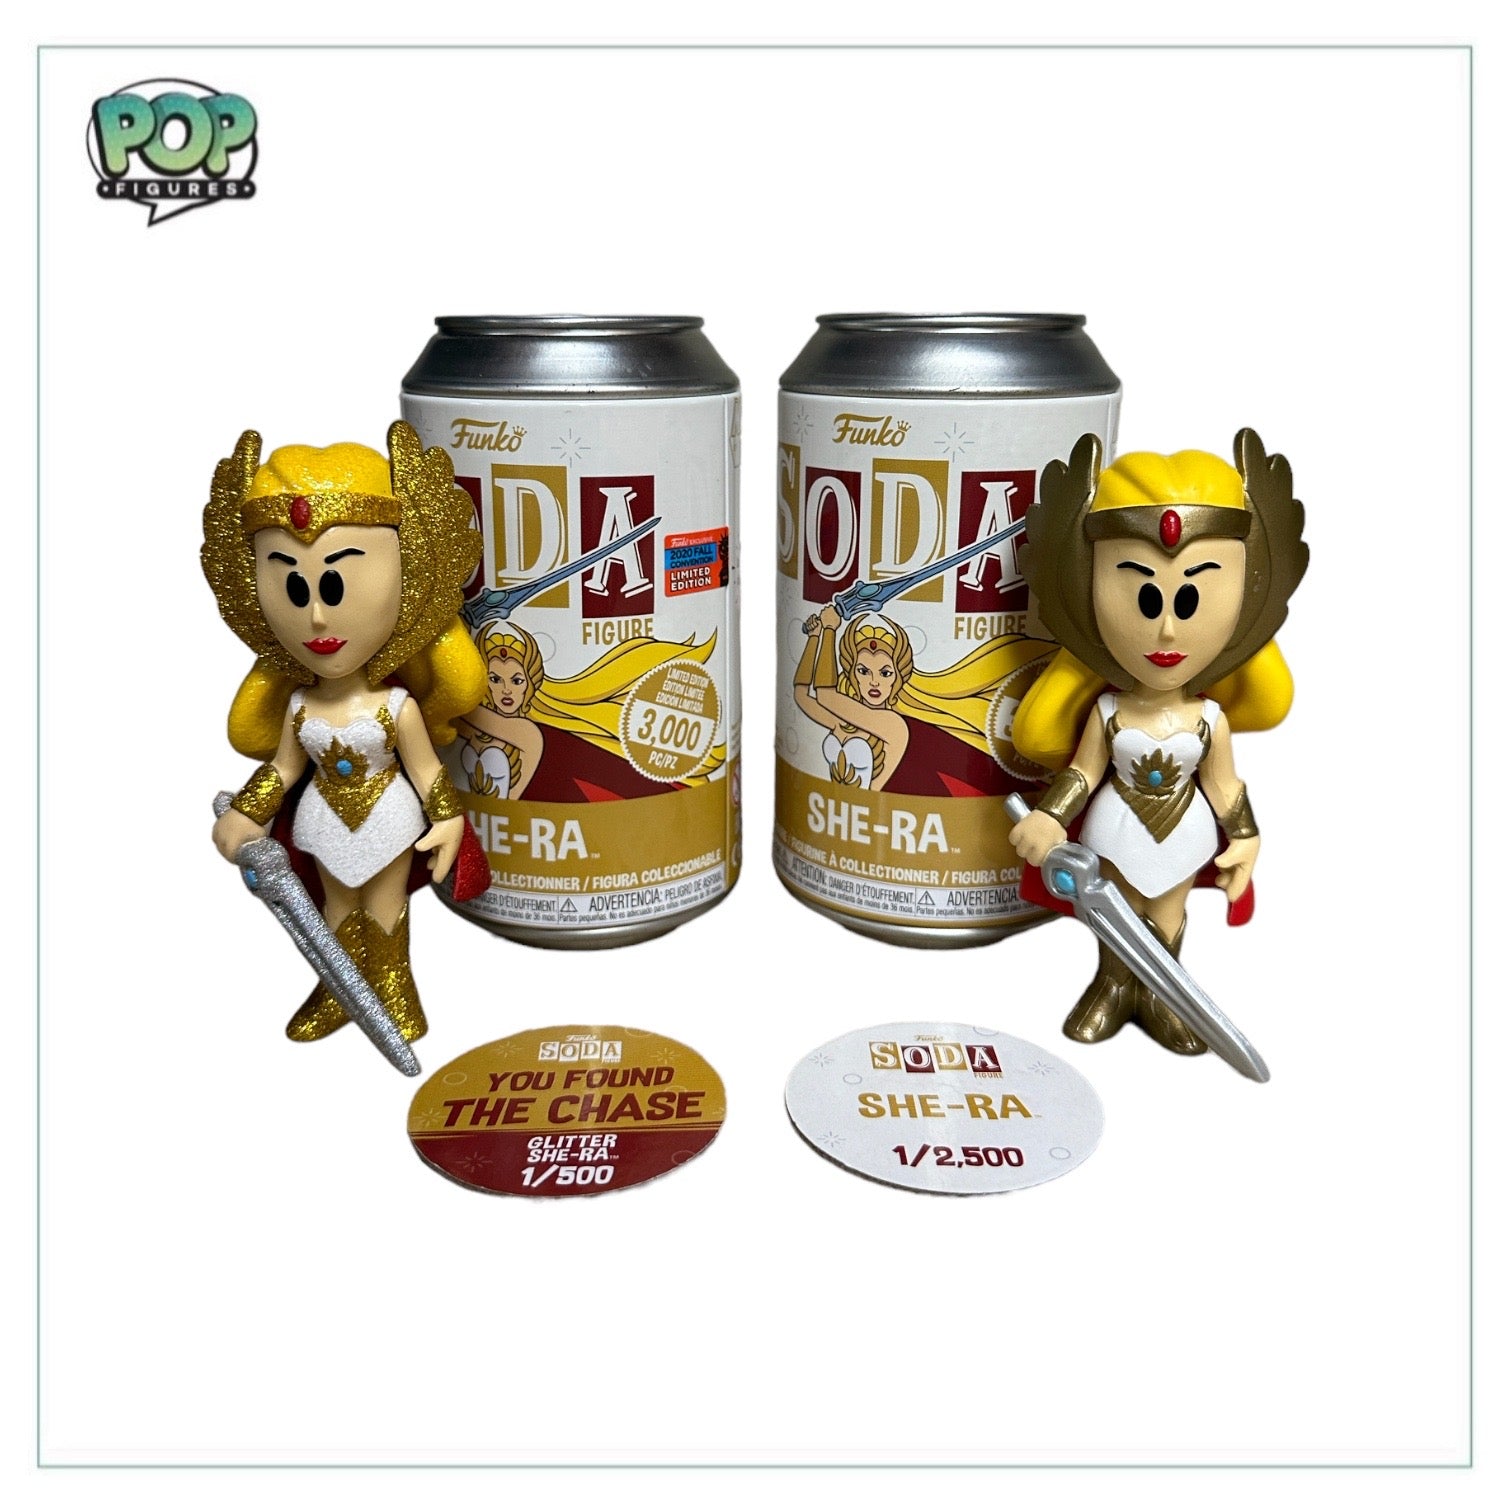 She-Ra Common & Chase Funko Soda Vinyl Figure Pair! - Masters of The Universe - NYCC 2020 Shared Exclusive LE1/2500 & LE1/500 Pcs